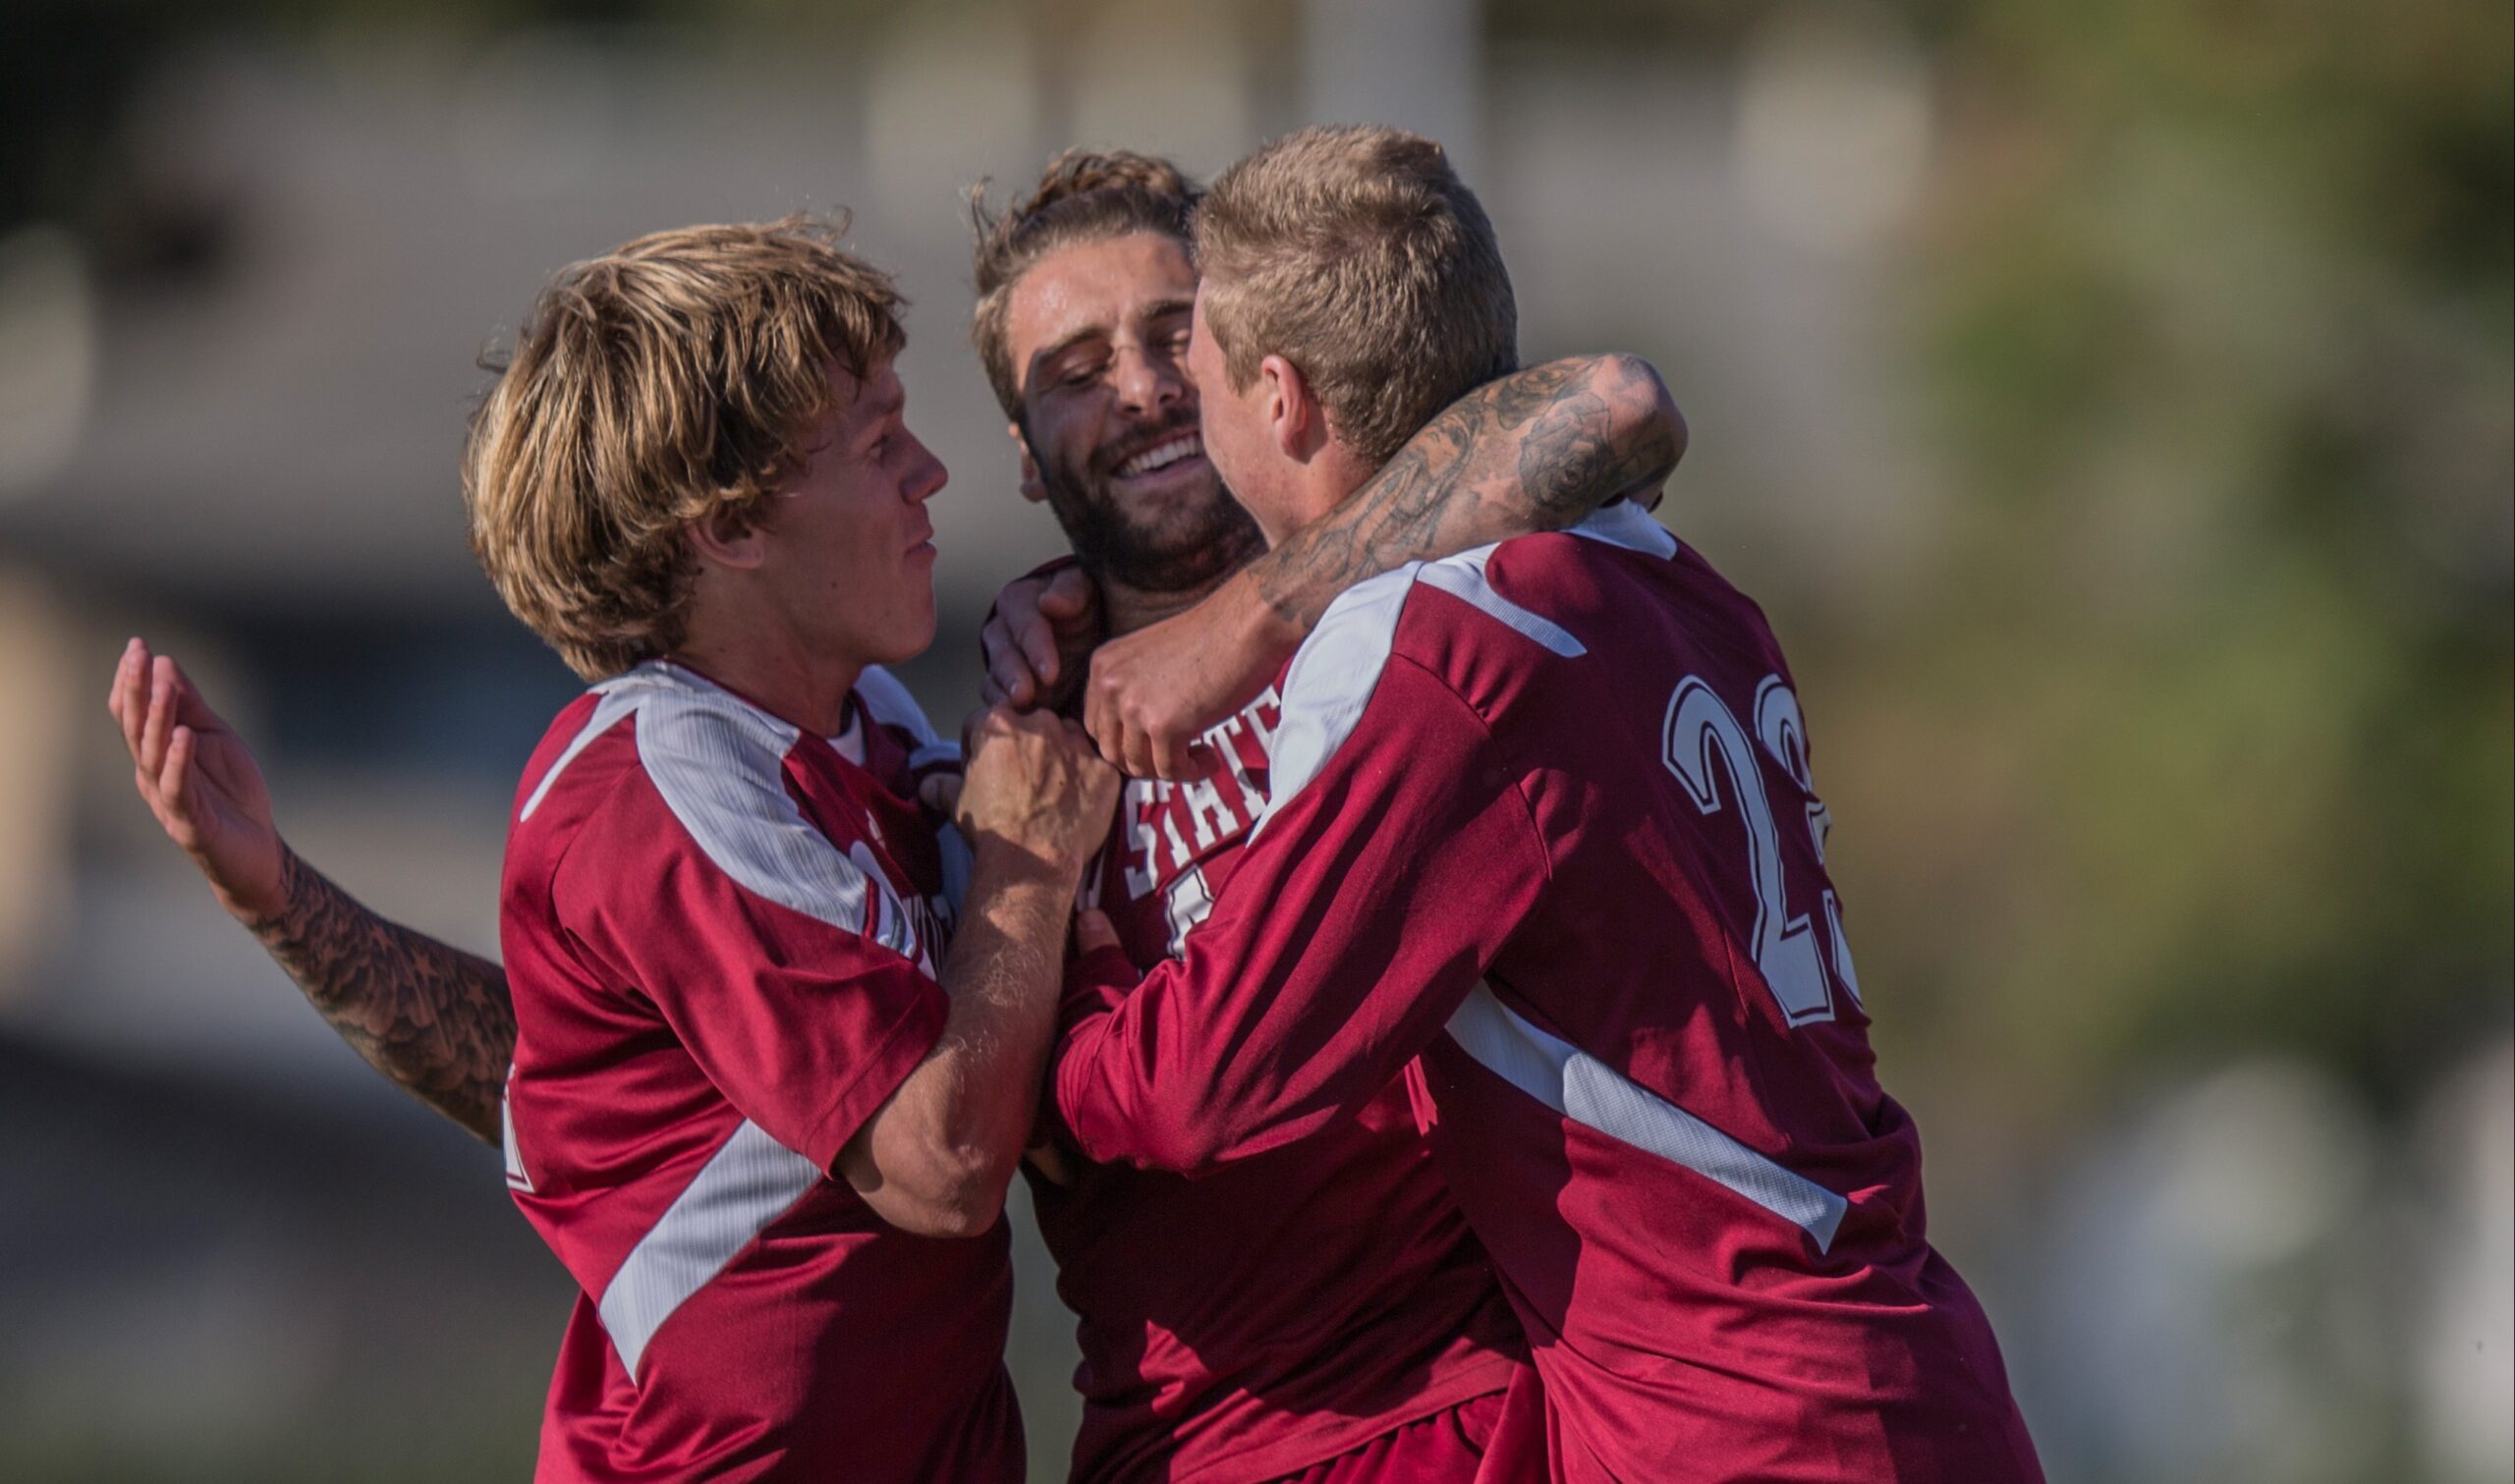 Three men's soccer players embrace in celebration after a game-winning goal.